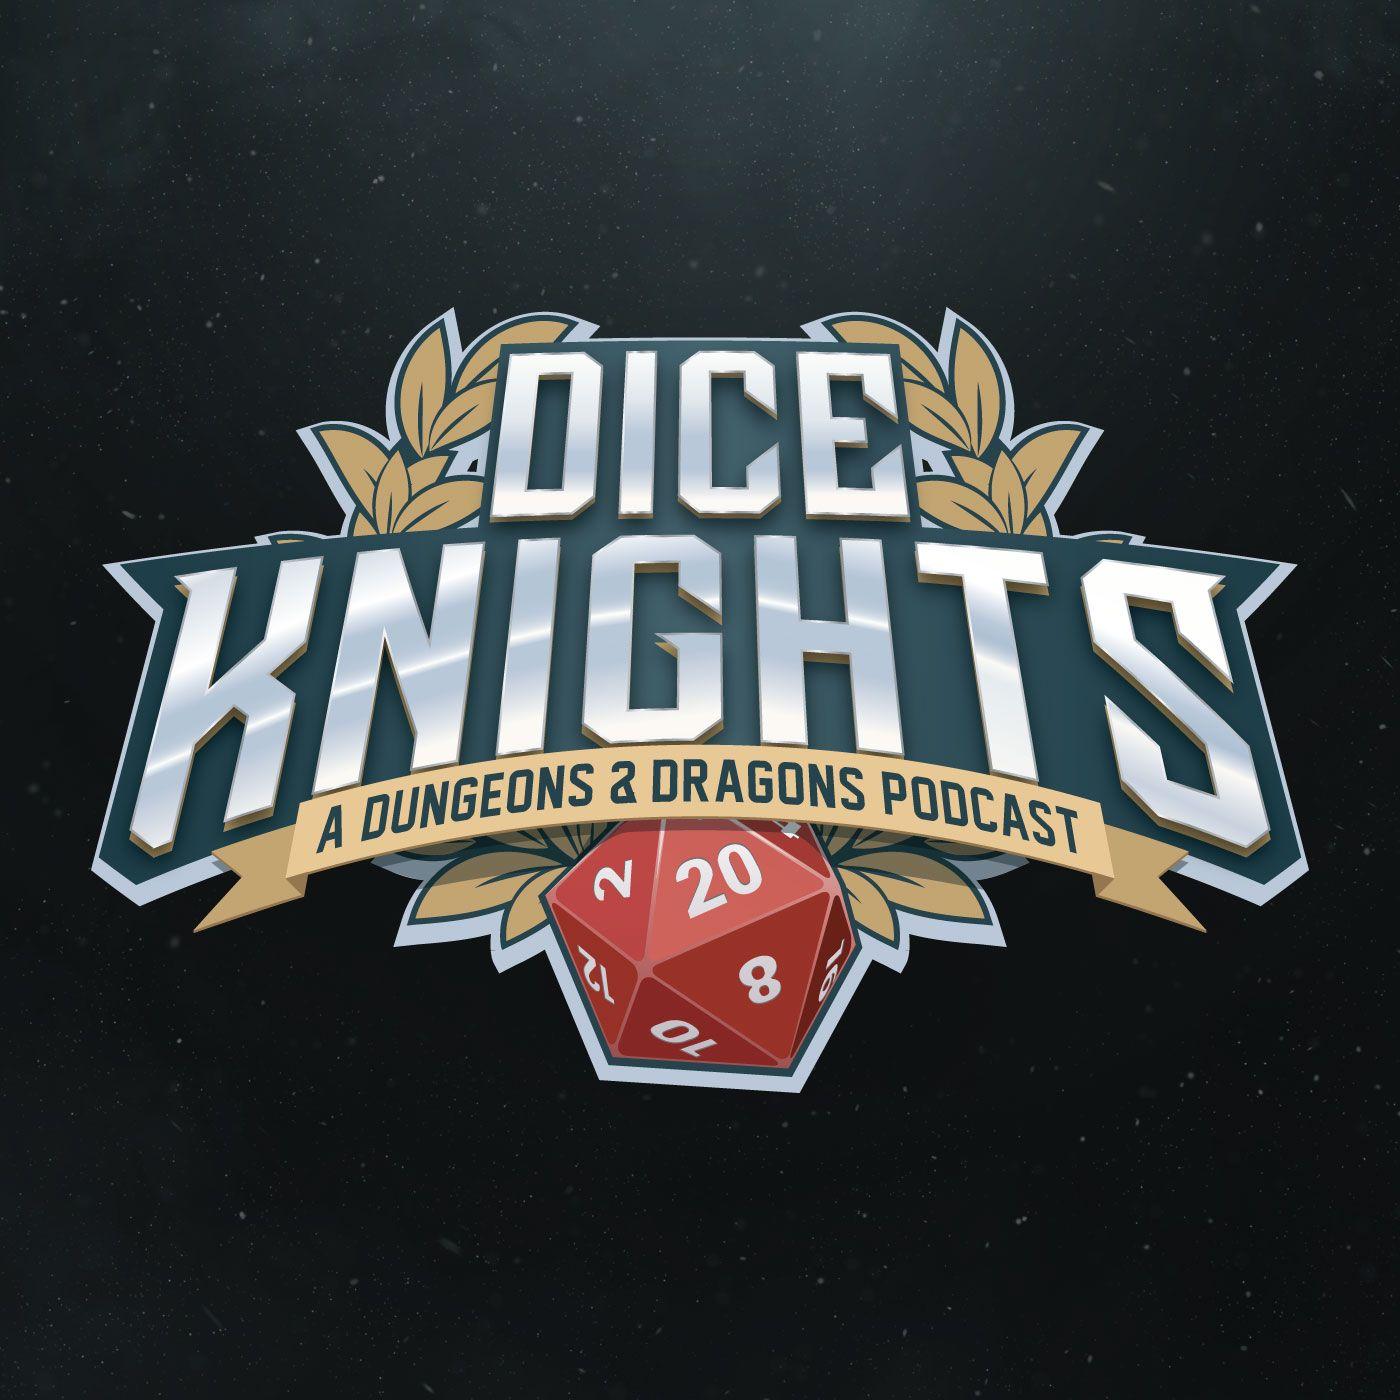 Google Play Podcast Logo - pod|fanatic | Podcast: DiceKnights: A D&D Actual Play Podcast